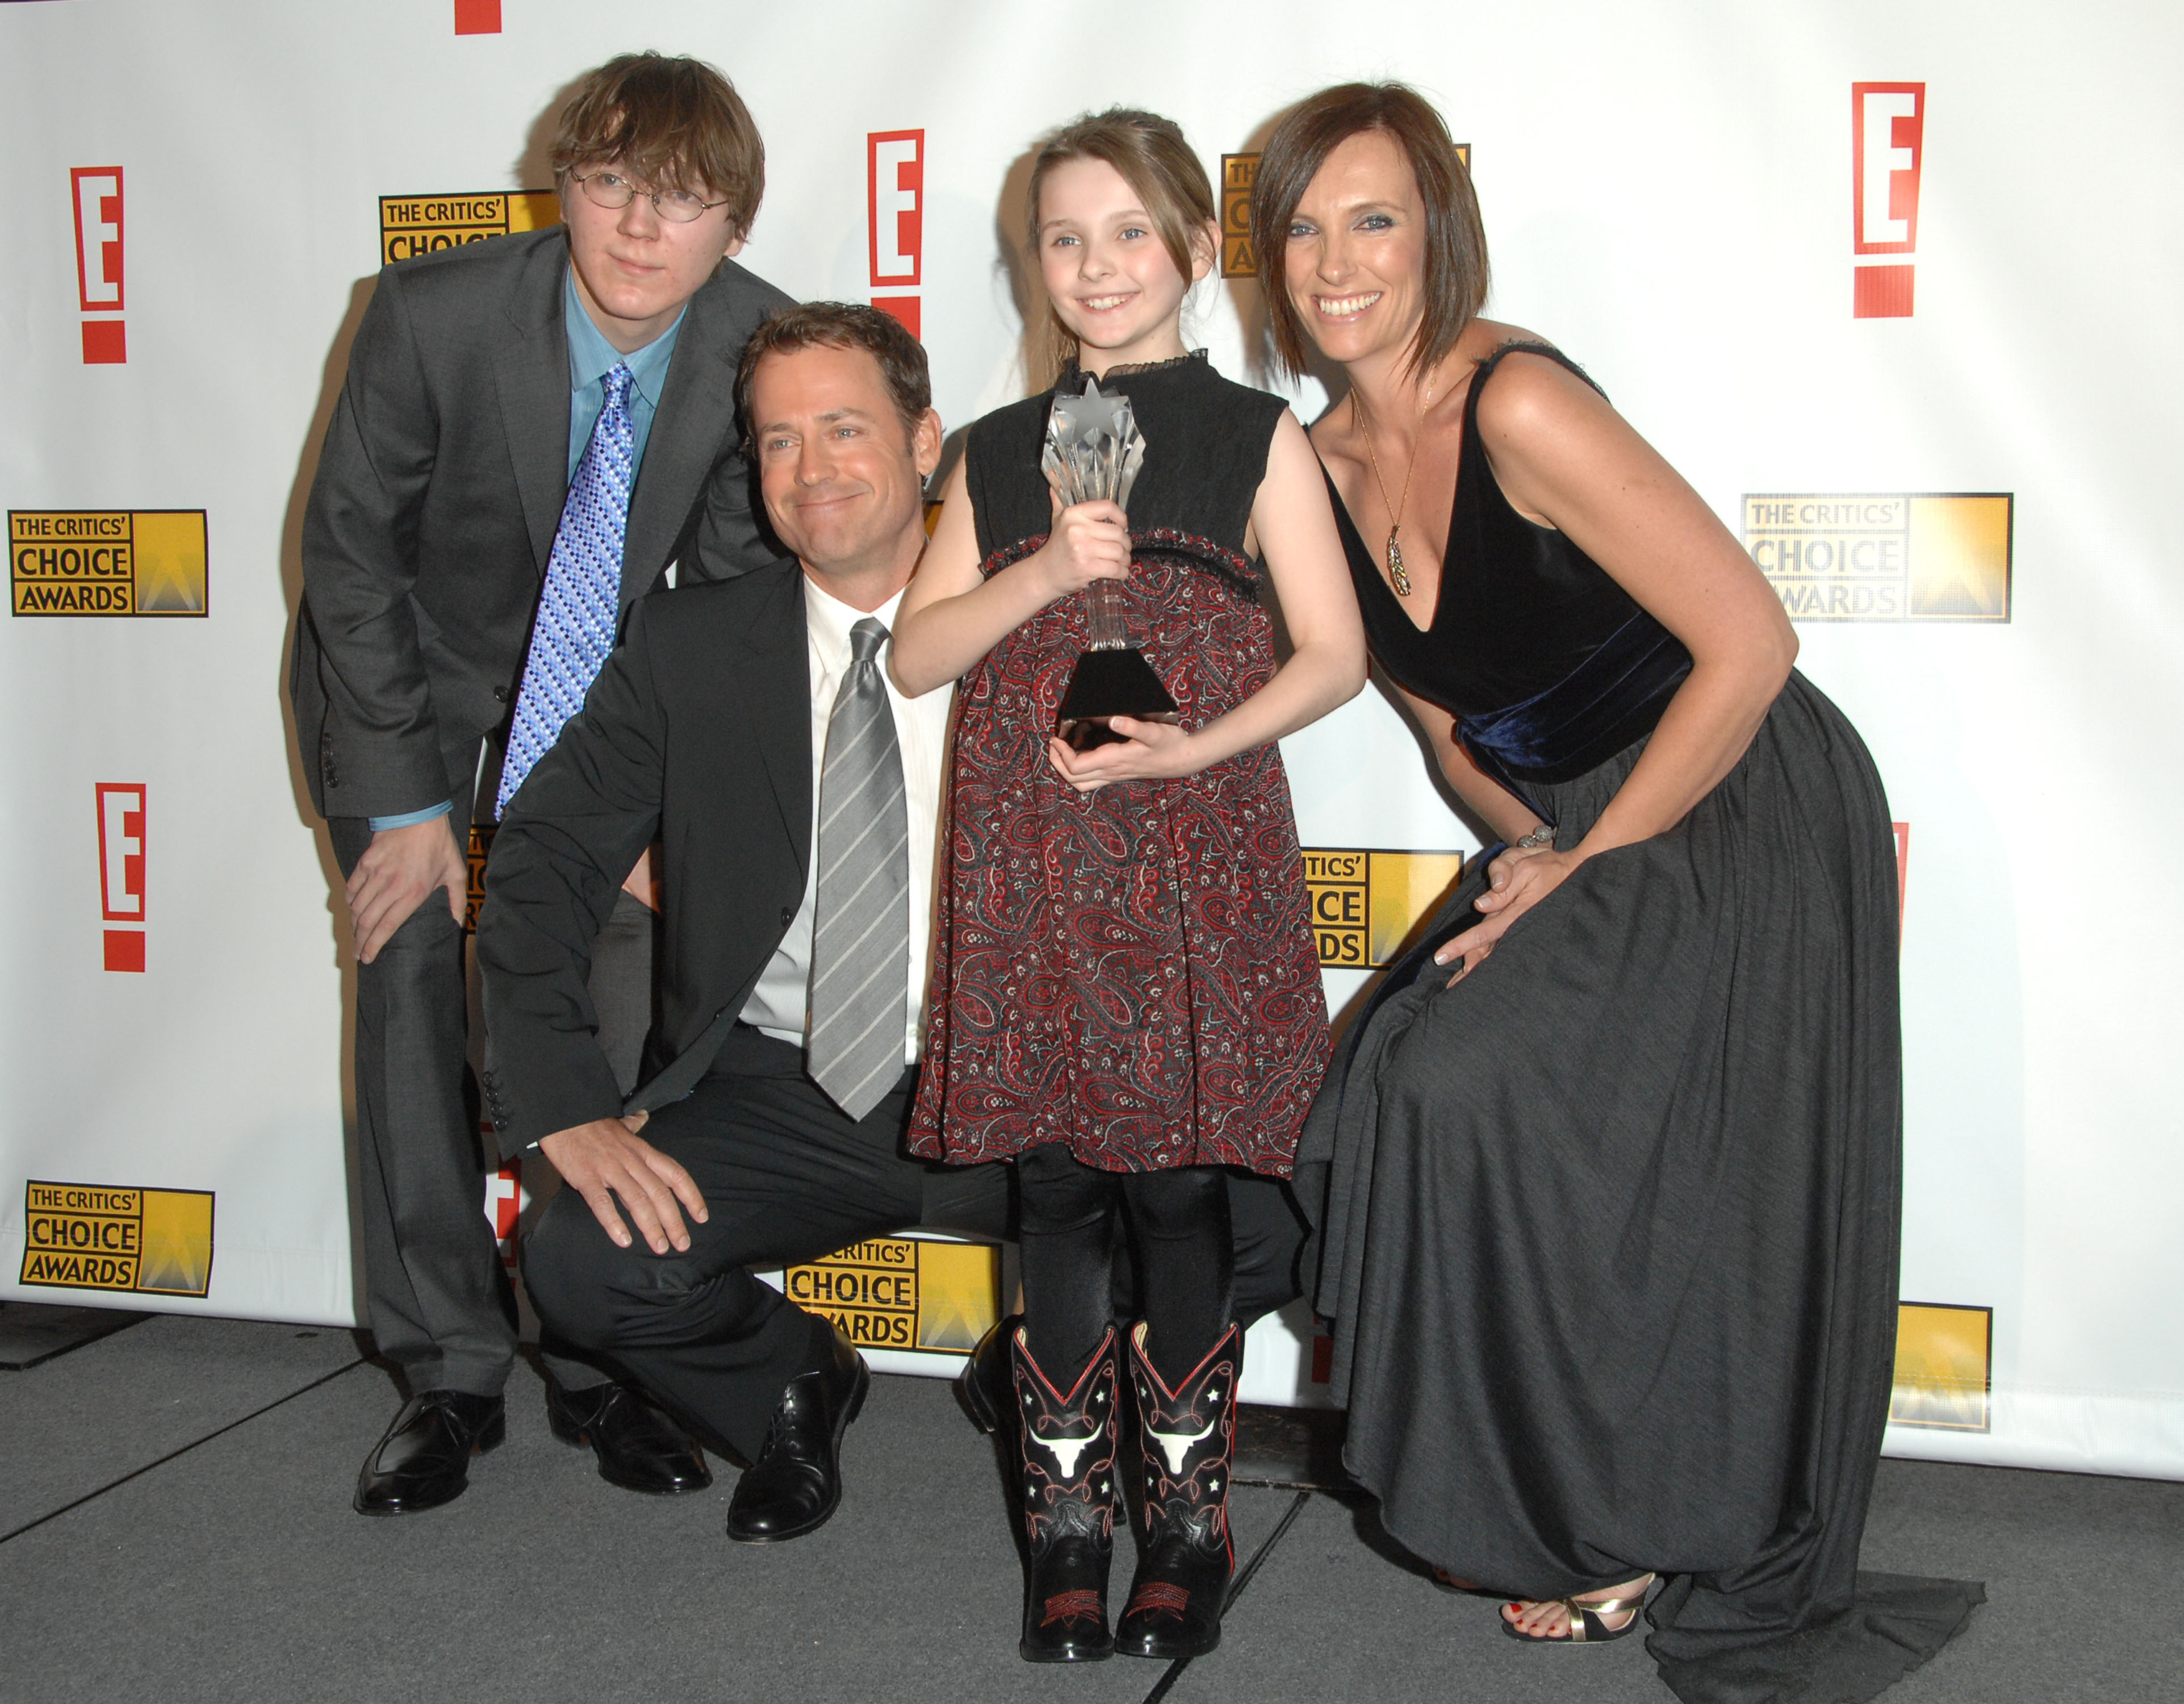 Paul Dano, Greg Kinnear, Abigail Breslin (center), winner of Best Young Actress for "Little Miss Sunshine," and Toni Collette at the 12th Annual Critics' Choice Awards on January 12, 2007. | Source: Getty Images